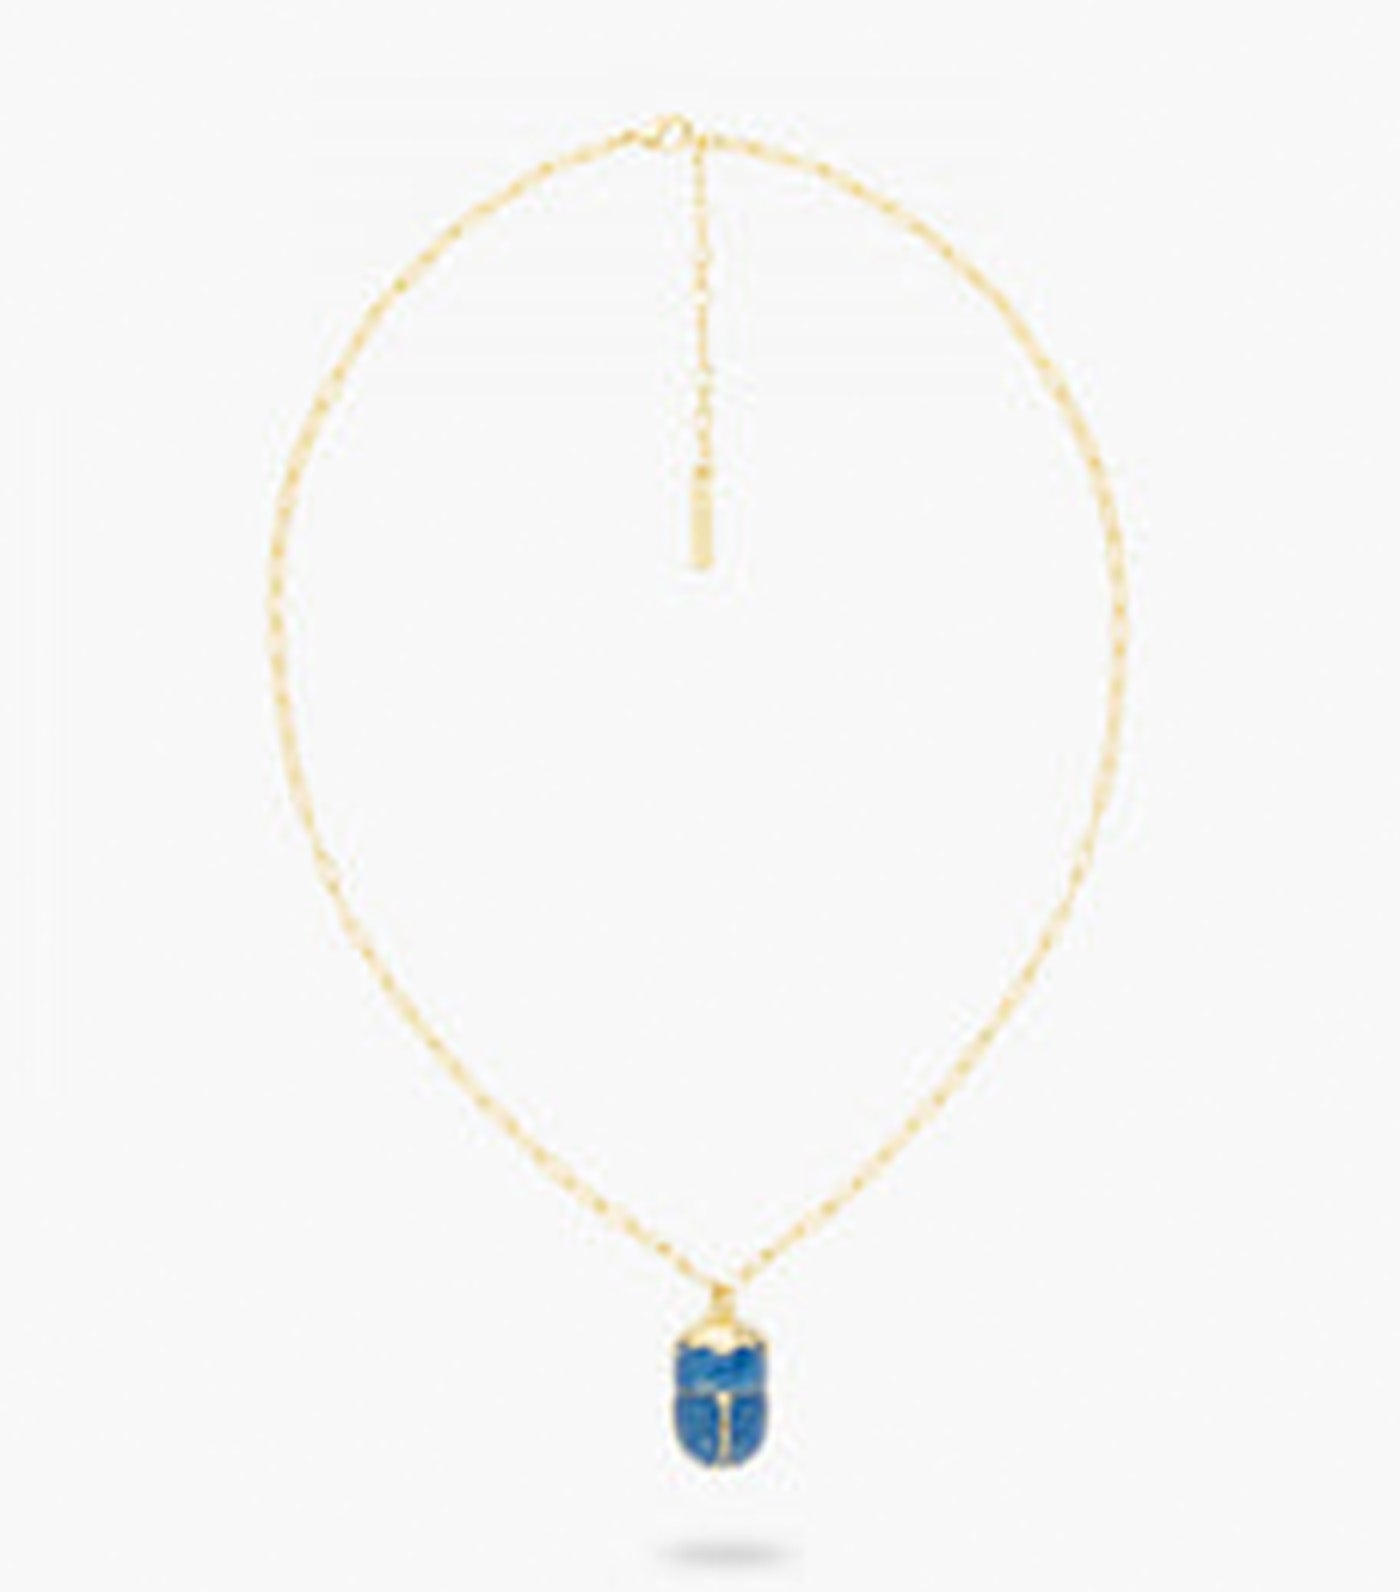 Blue Scarab Beetle Rectangle Necklace